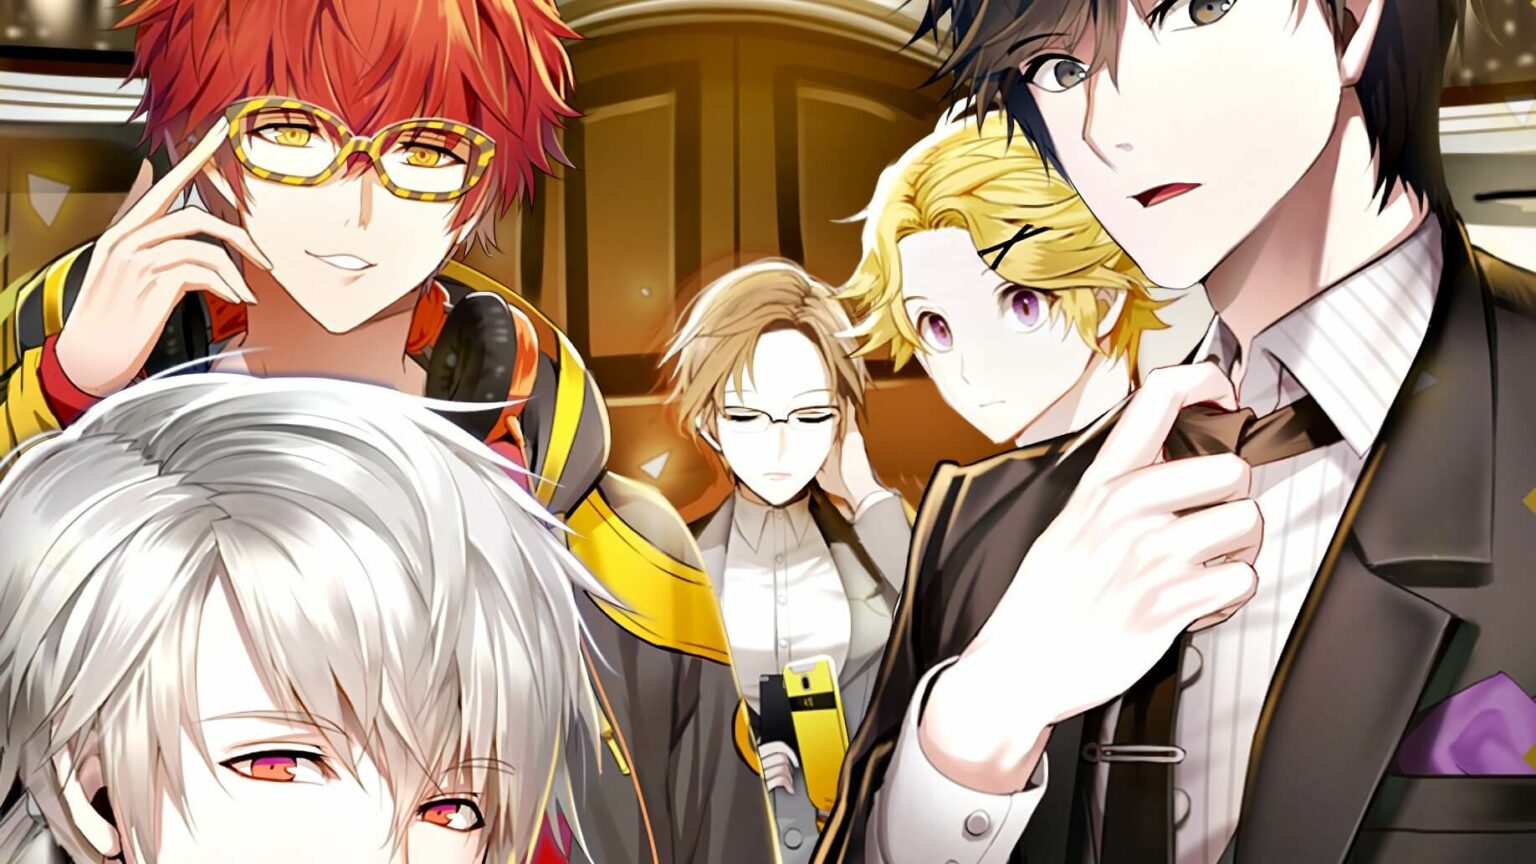 mystic messenger emails ray